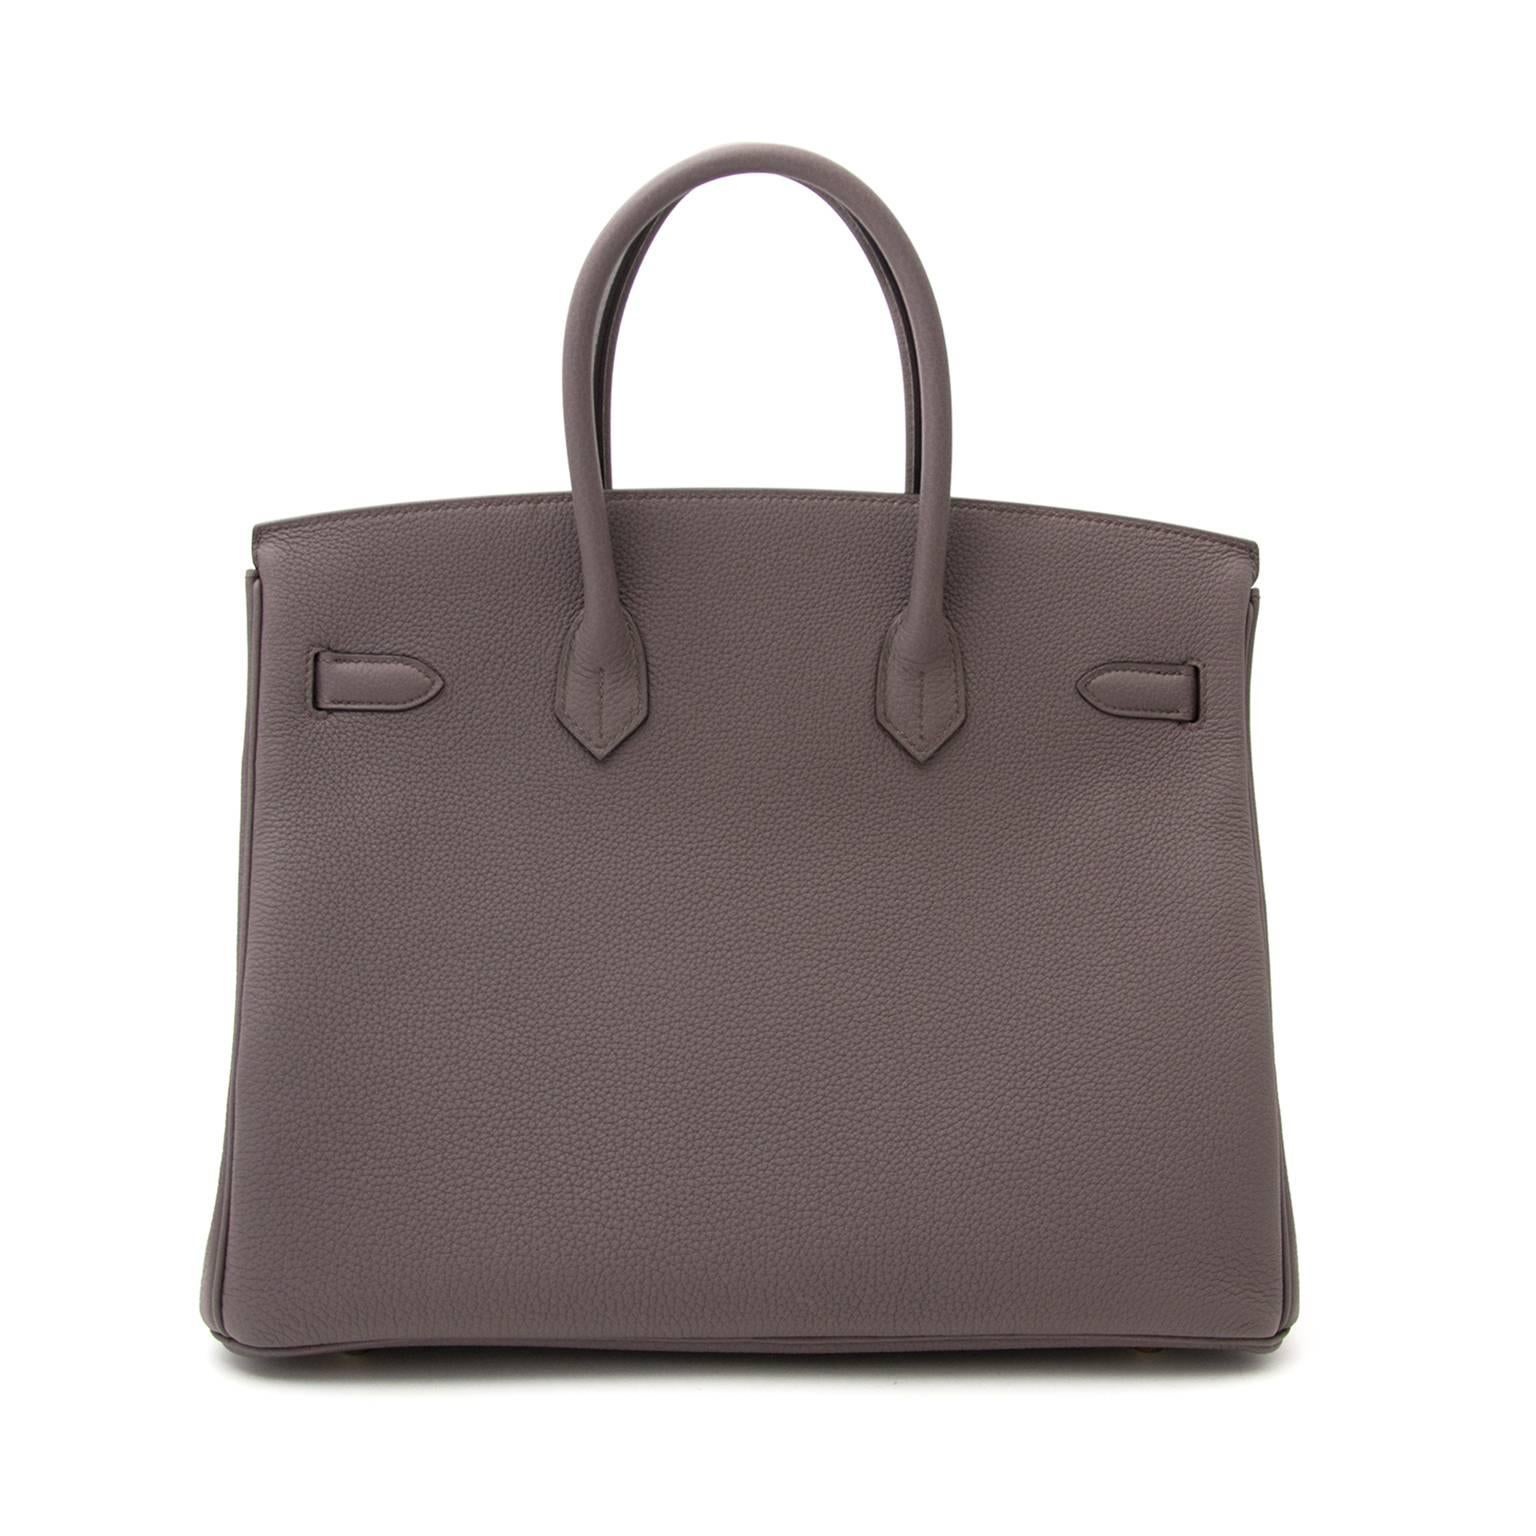 Store Fresh Hermès Birkin bag in timeless warm grey 'Etain' which contrast beautifully with the gold-tone hardware.
The Togo leather is soft to the touch and the fine grain gives theh bag a luxurious allure.
Never worn, straight from the store!